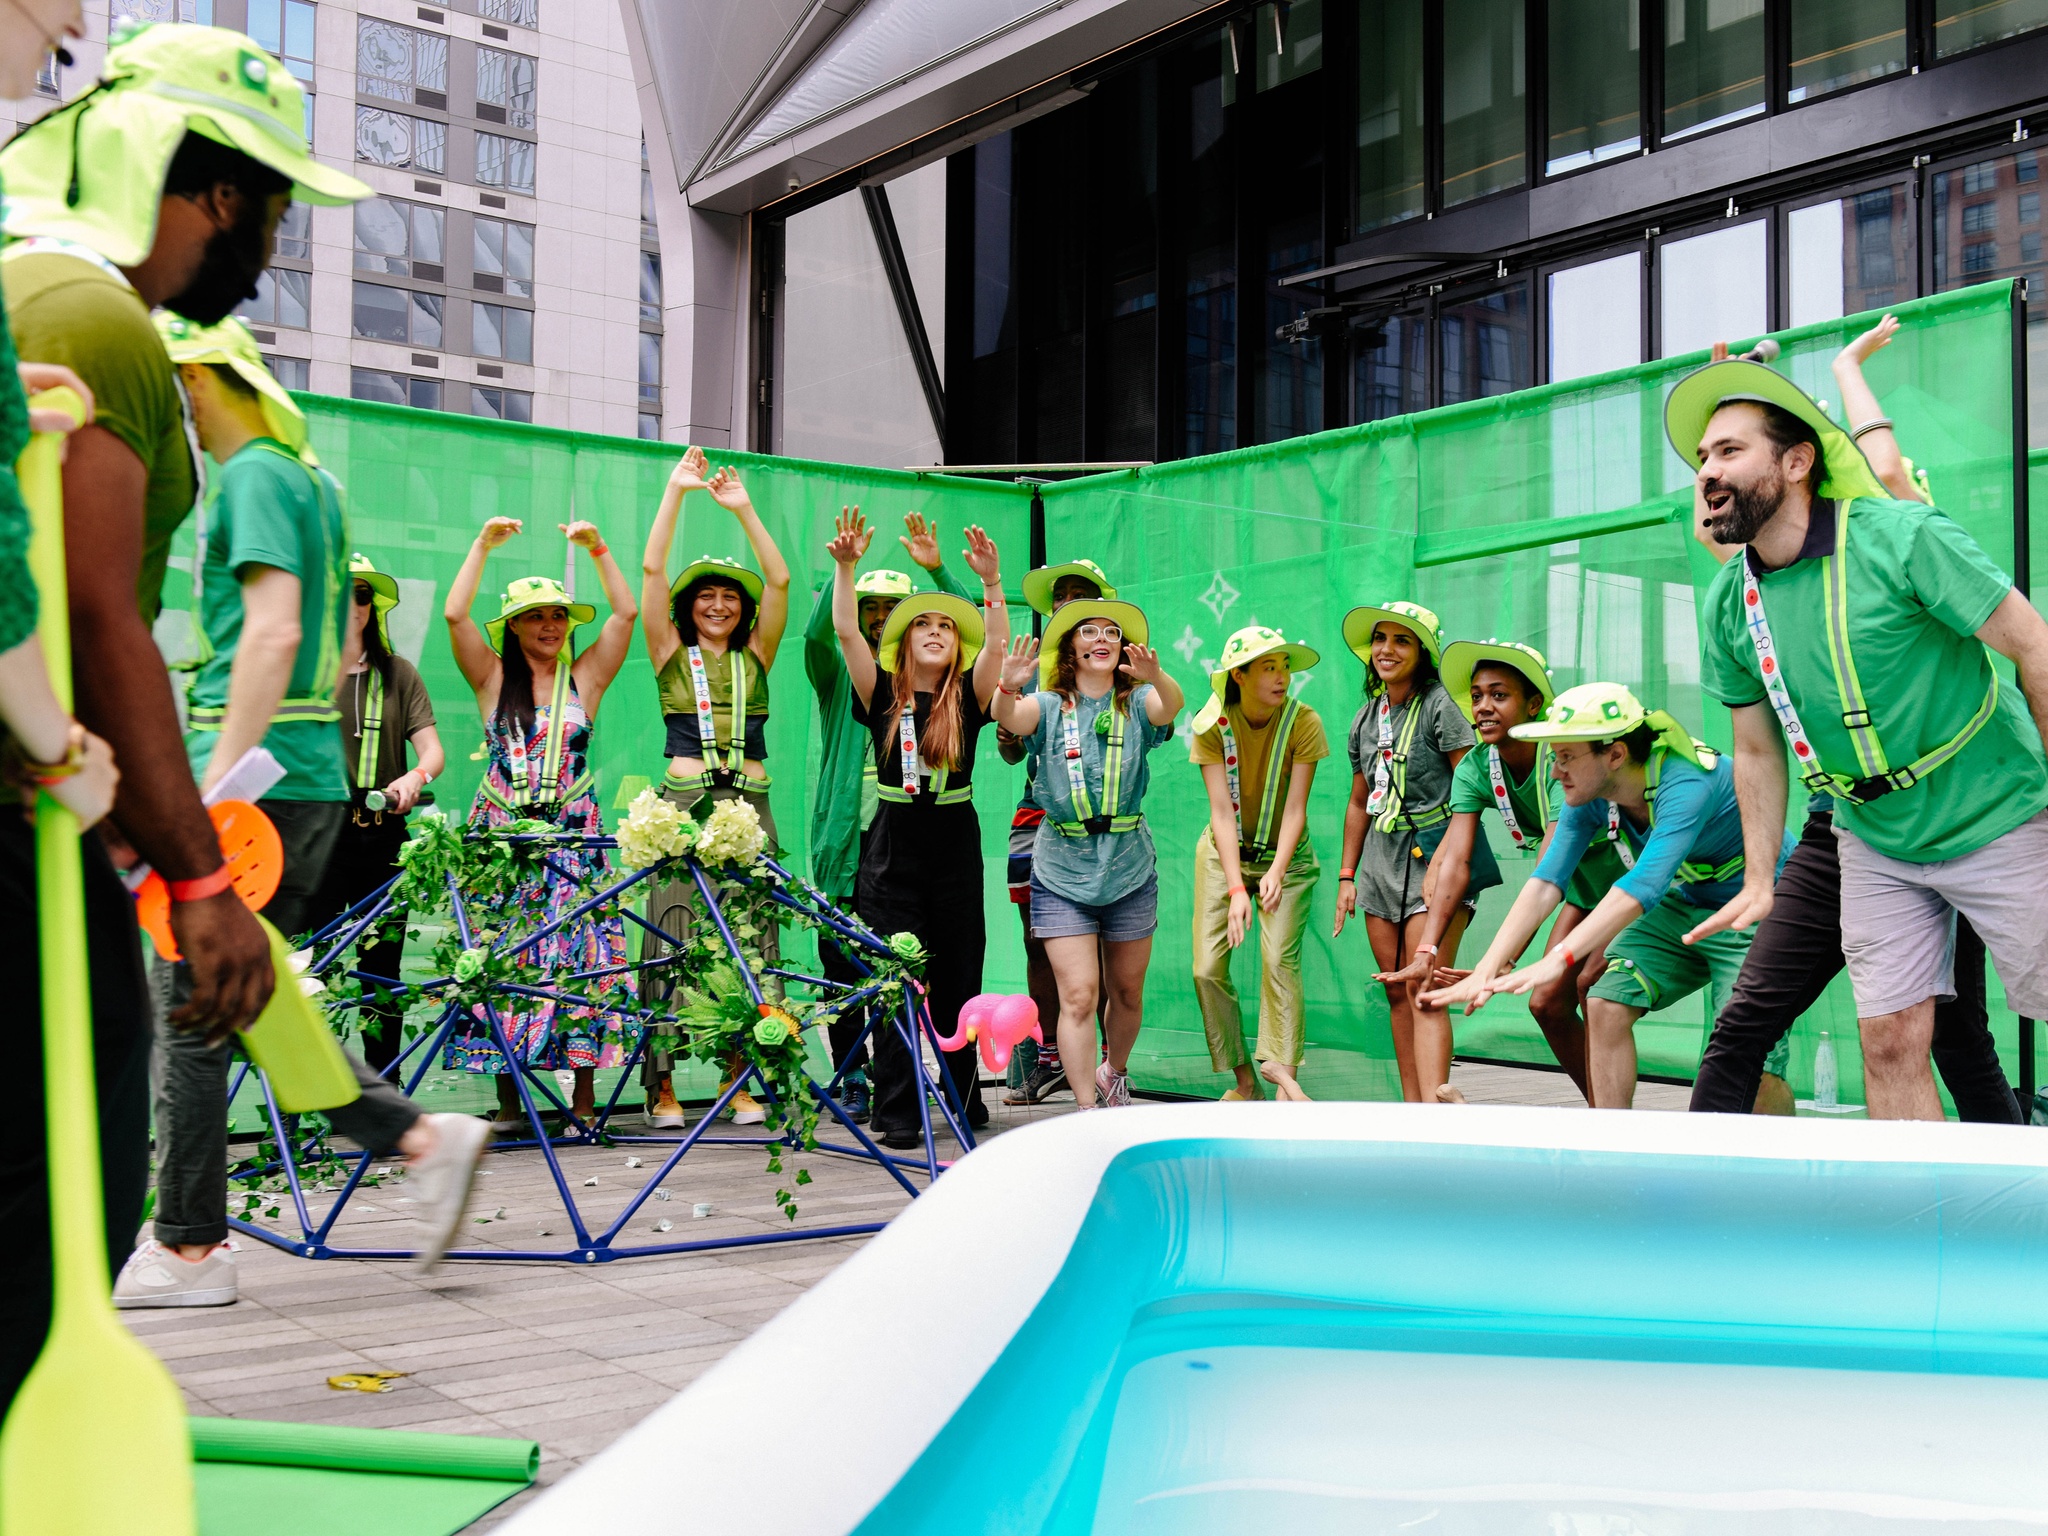 A group of participants in green hats, in front of a kiddie pool.